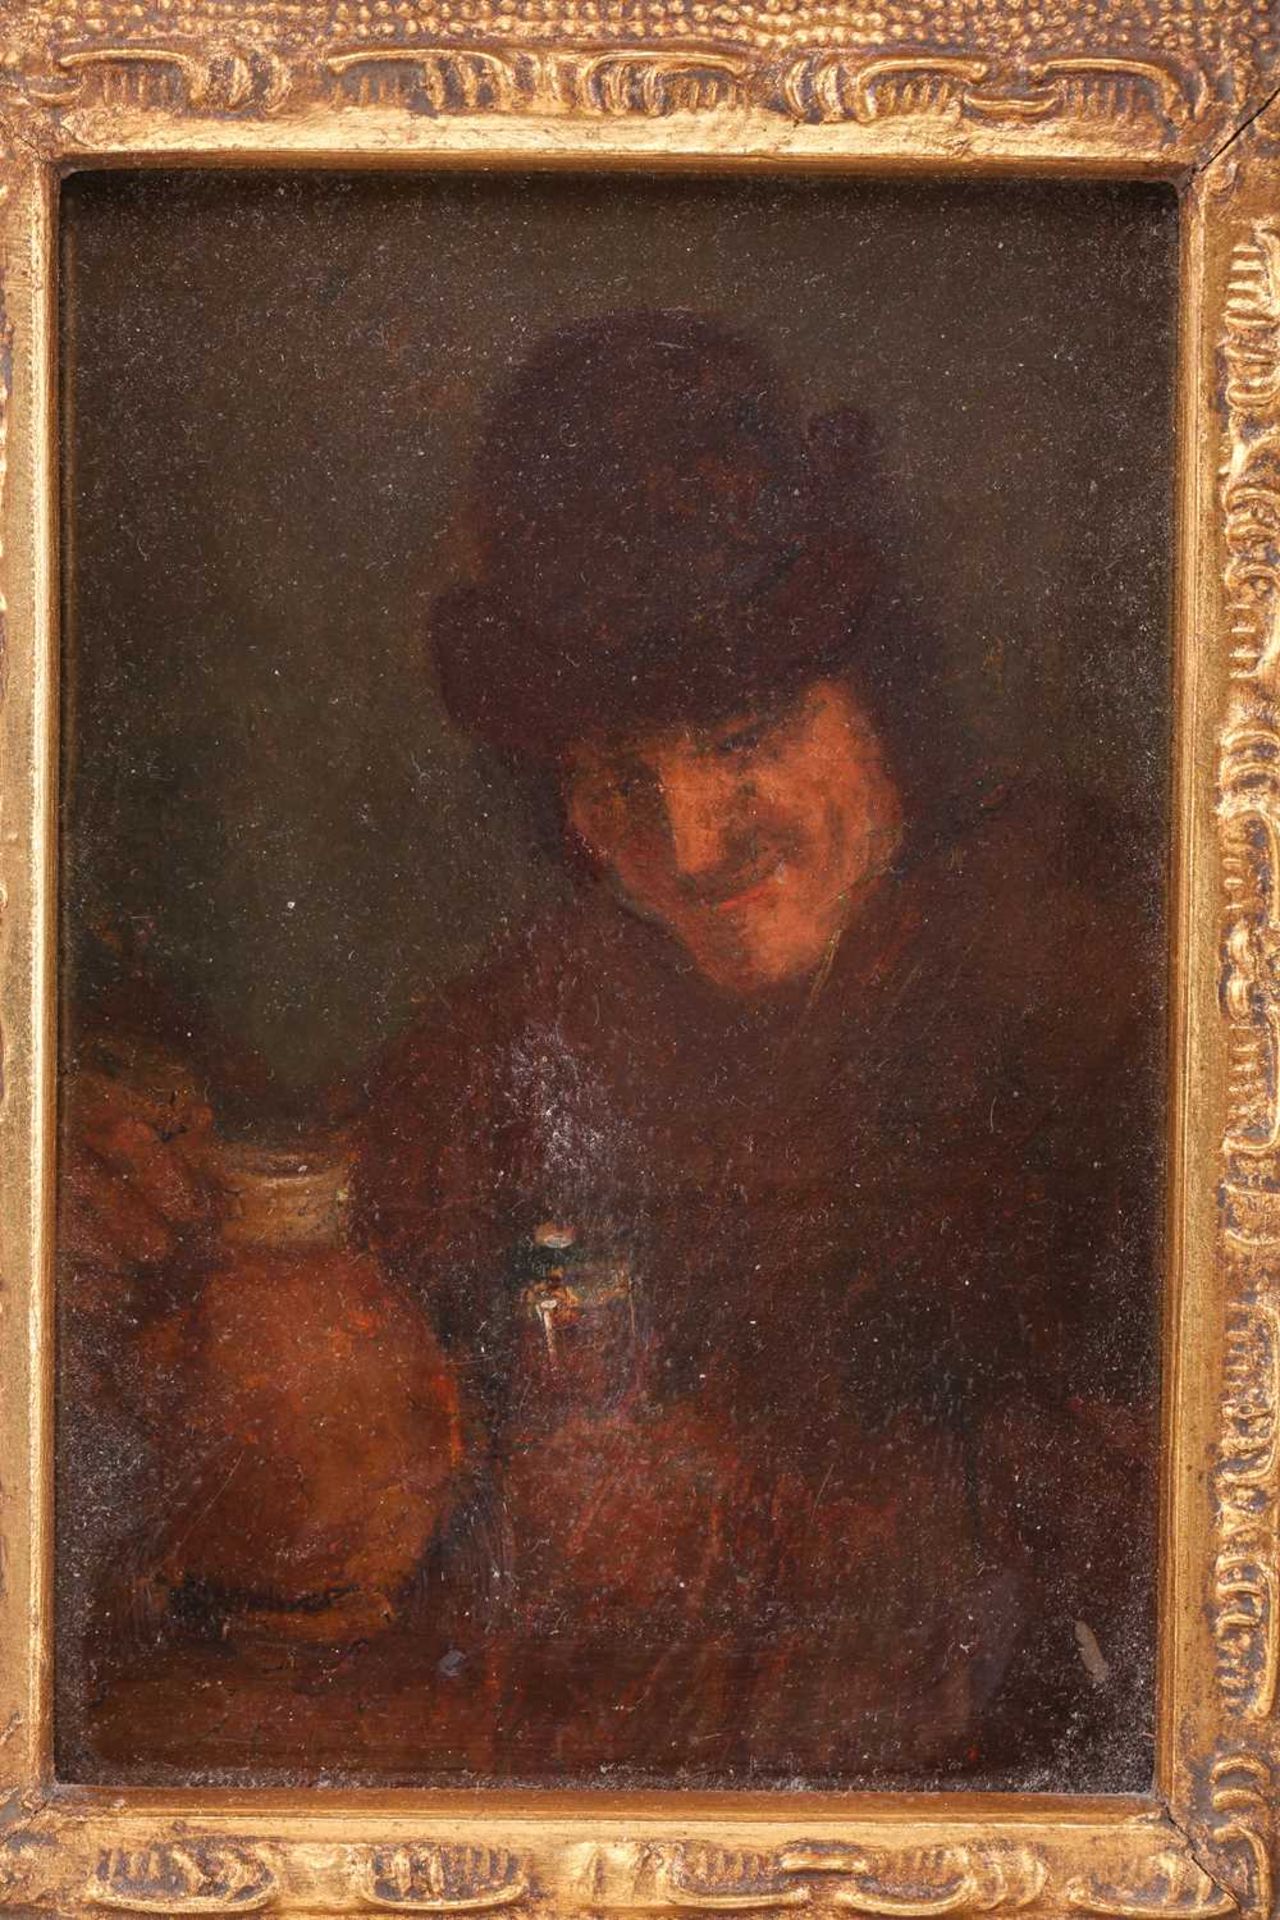 19th century continental school, a Flemish peasant regaling, oil on oak panel, ink inscribed label - Image 4 of 8